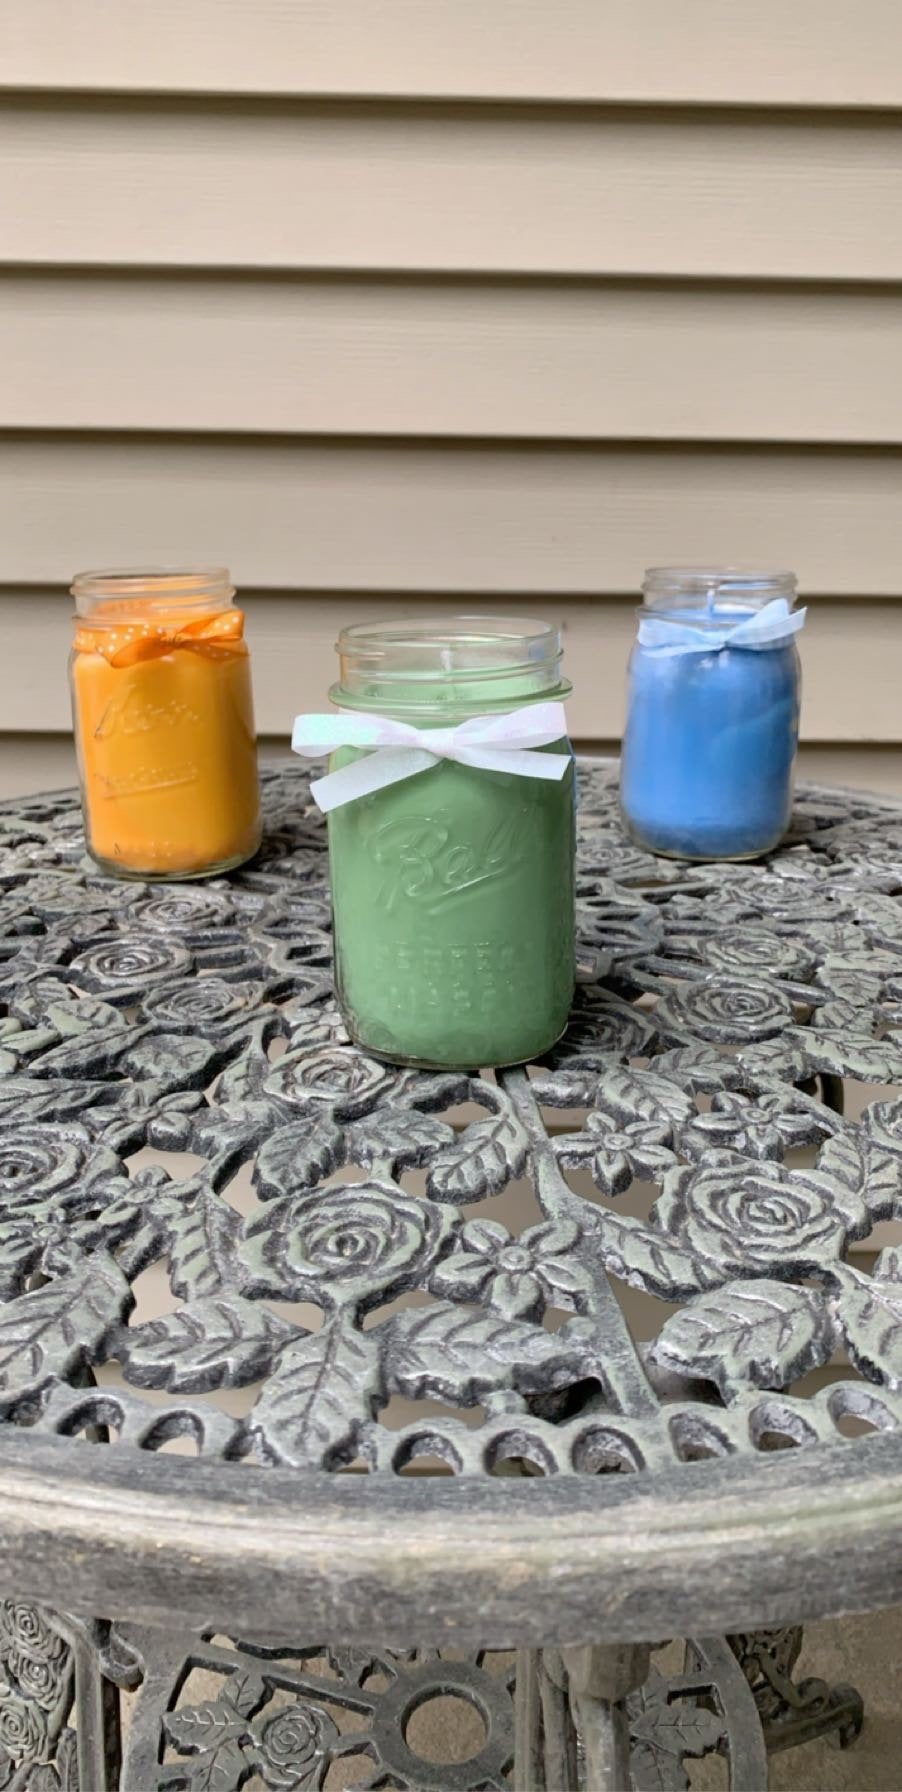 Yellow + Blue = Green soy candles-candle sets-spa candles-gifts for her-housewarming gifts-rustic-home decor-weddings-scented candles